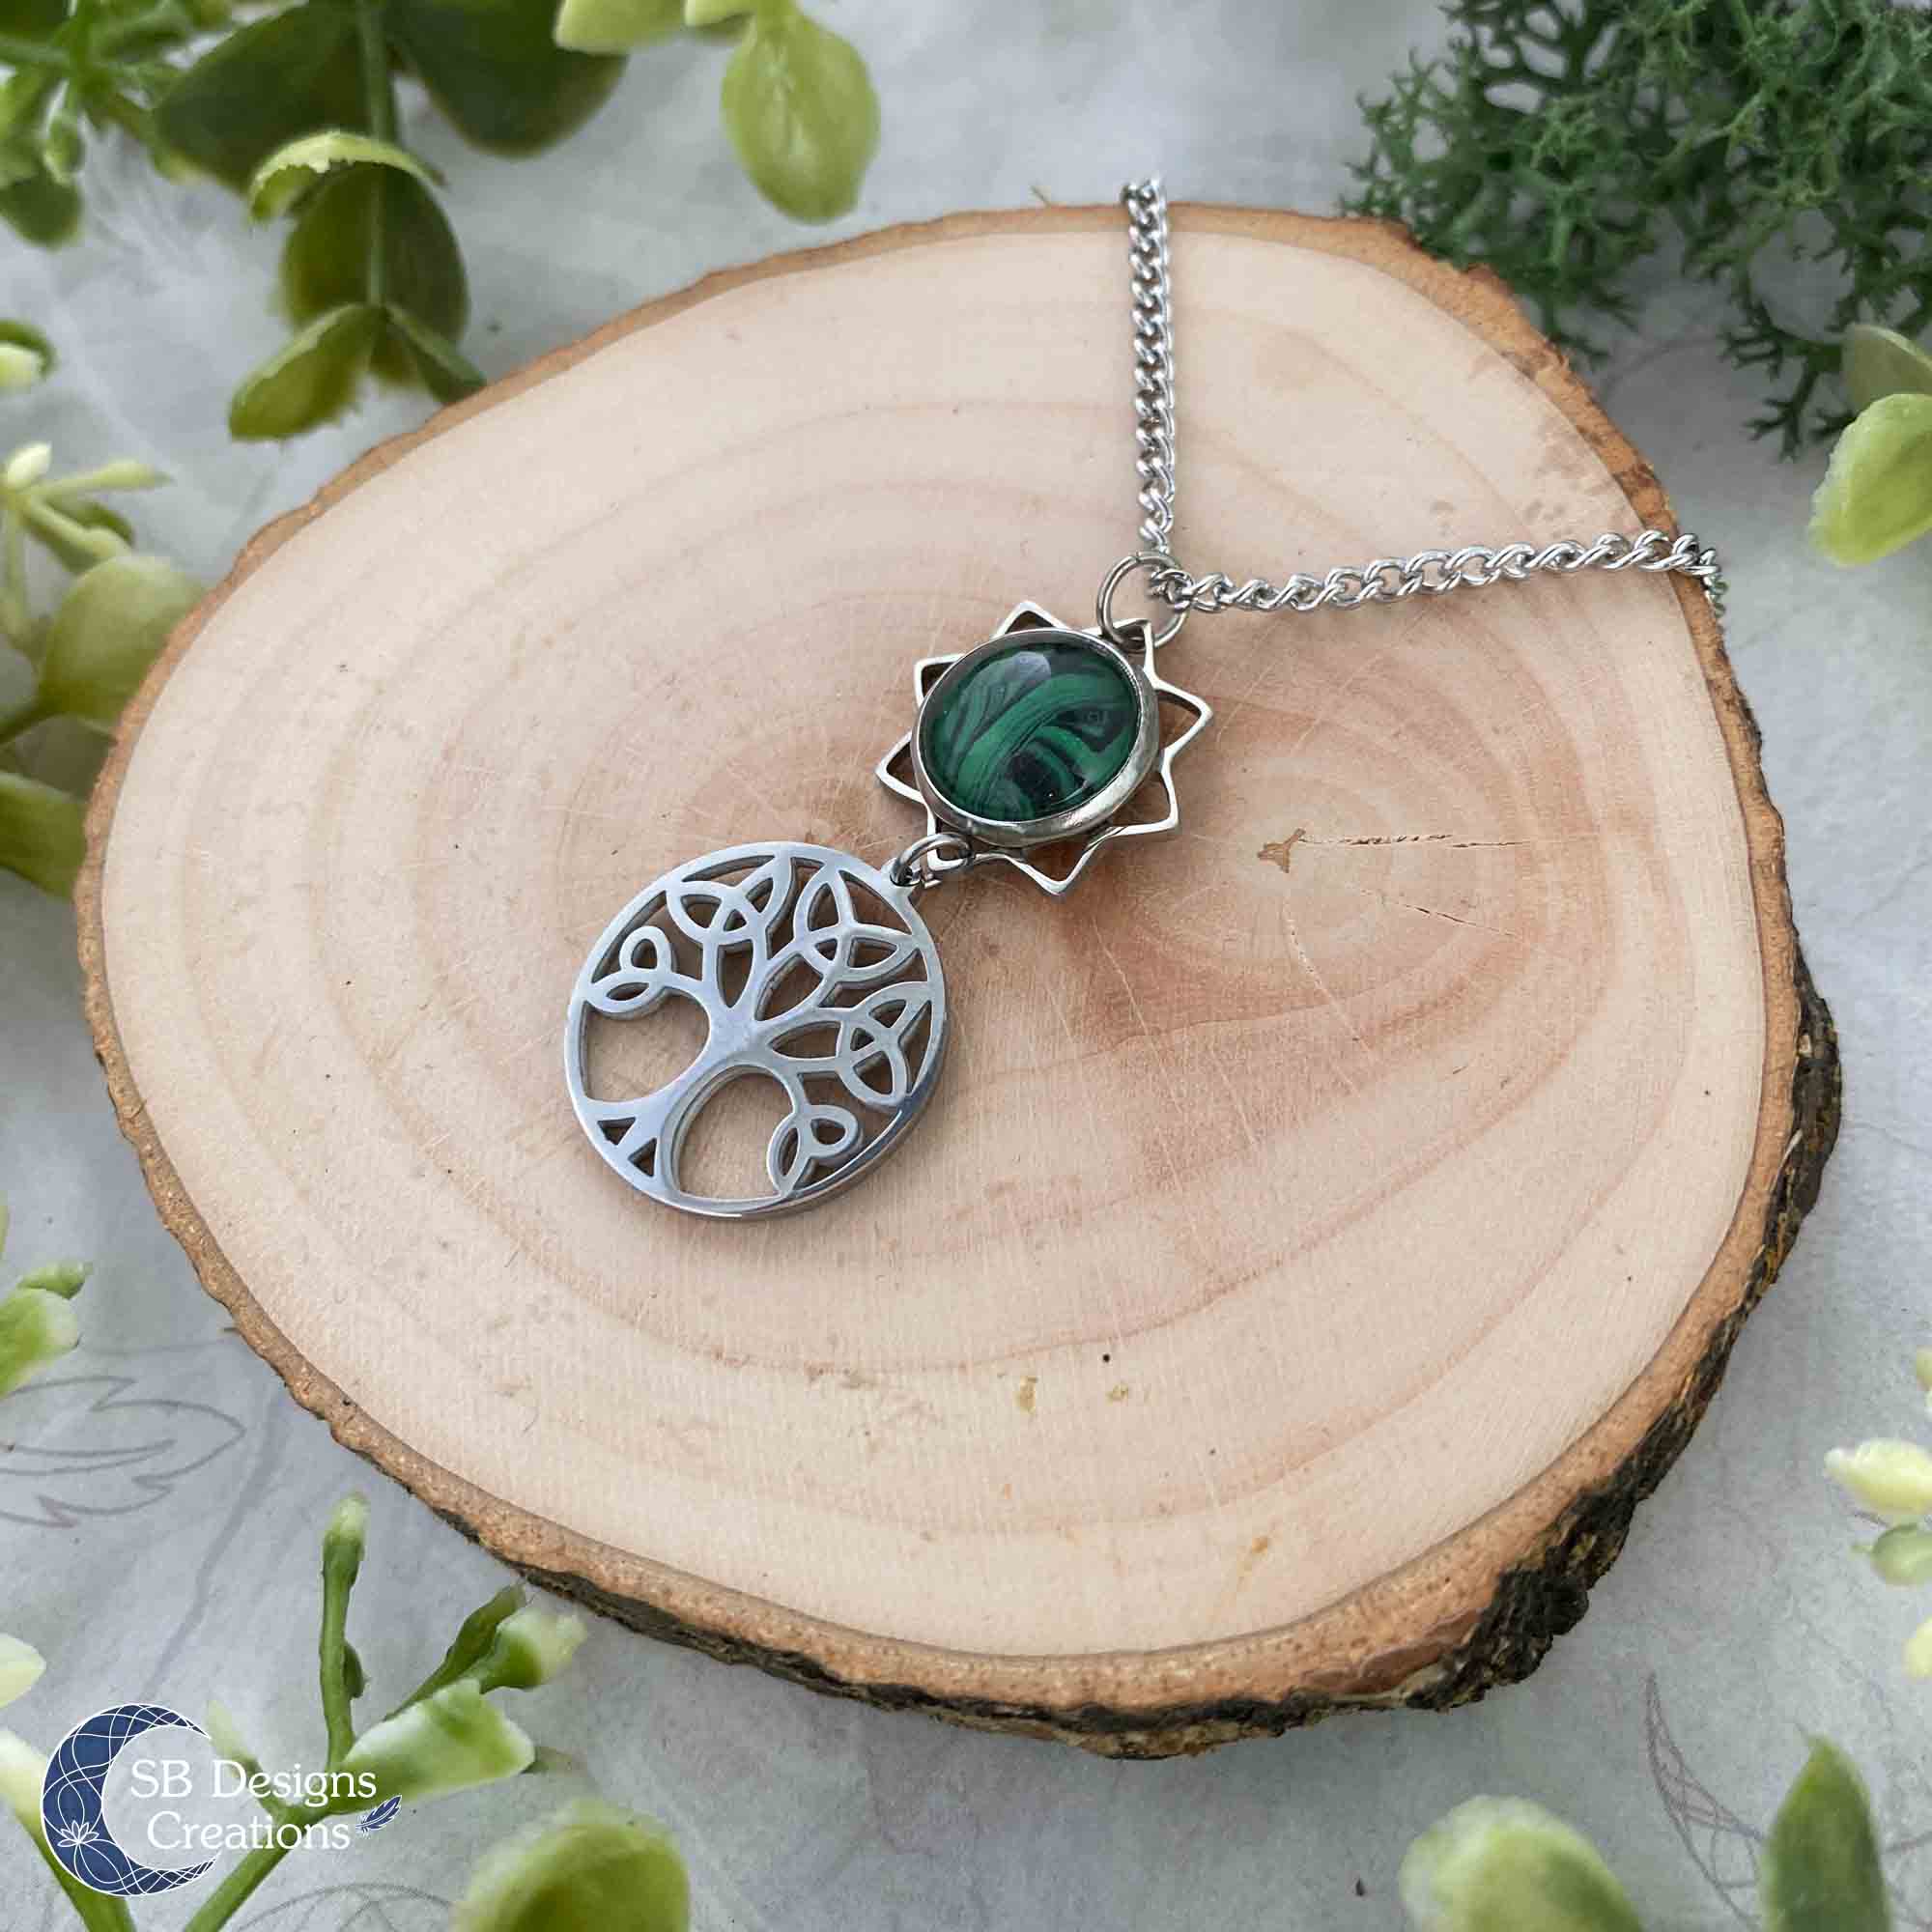 shore Panorama Smash Tree of Life Levensboom Ketting Groen-Zwart - SB Designs Creations |  Products created with magick